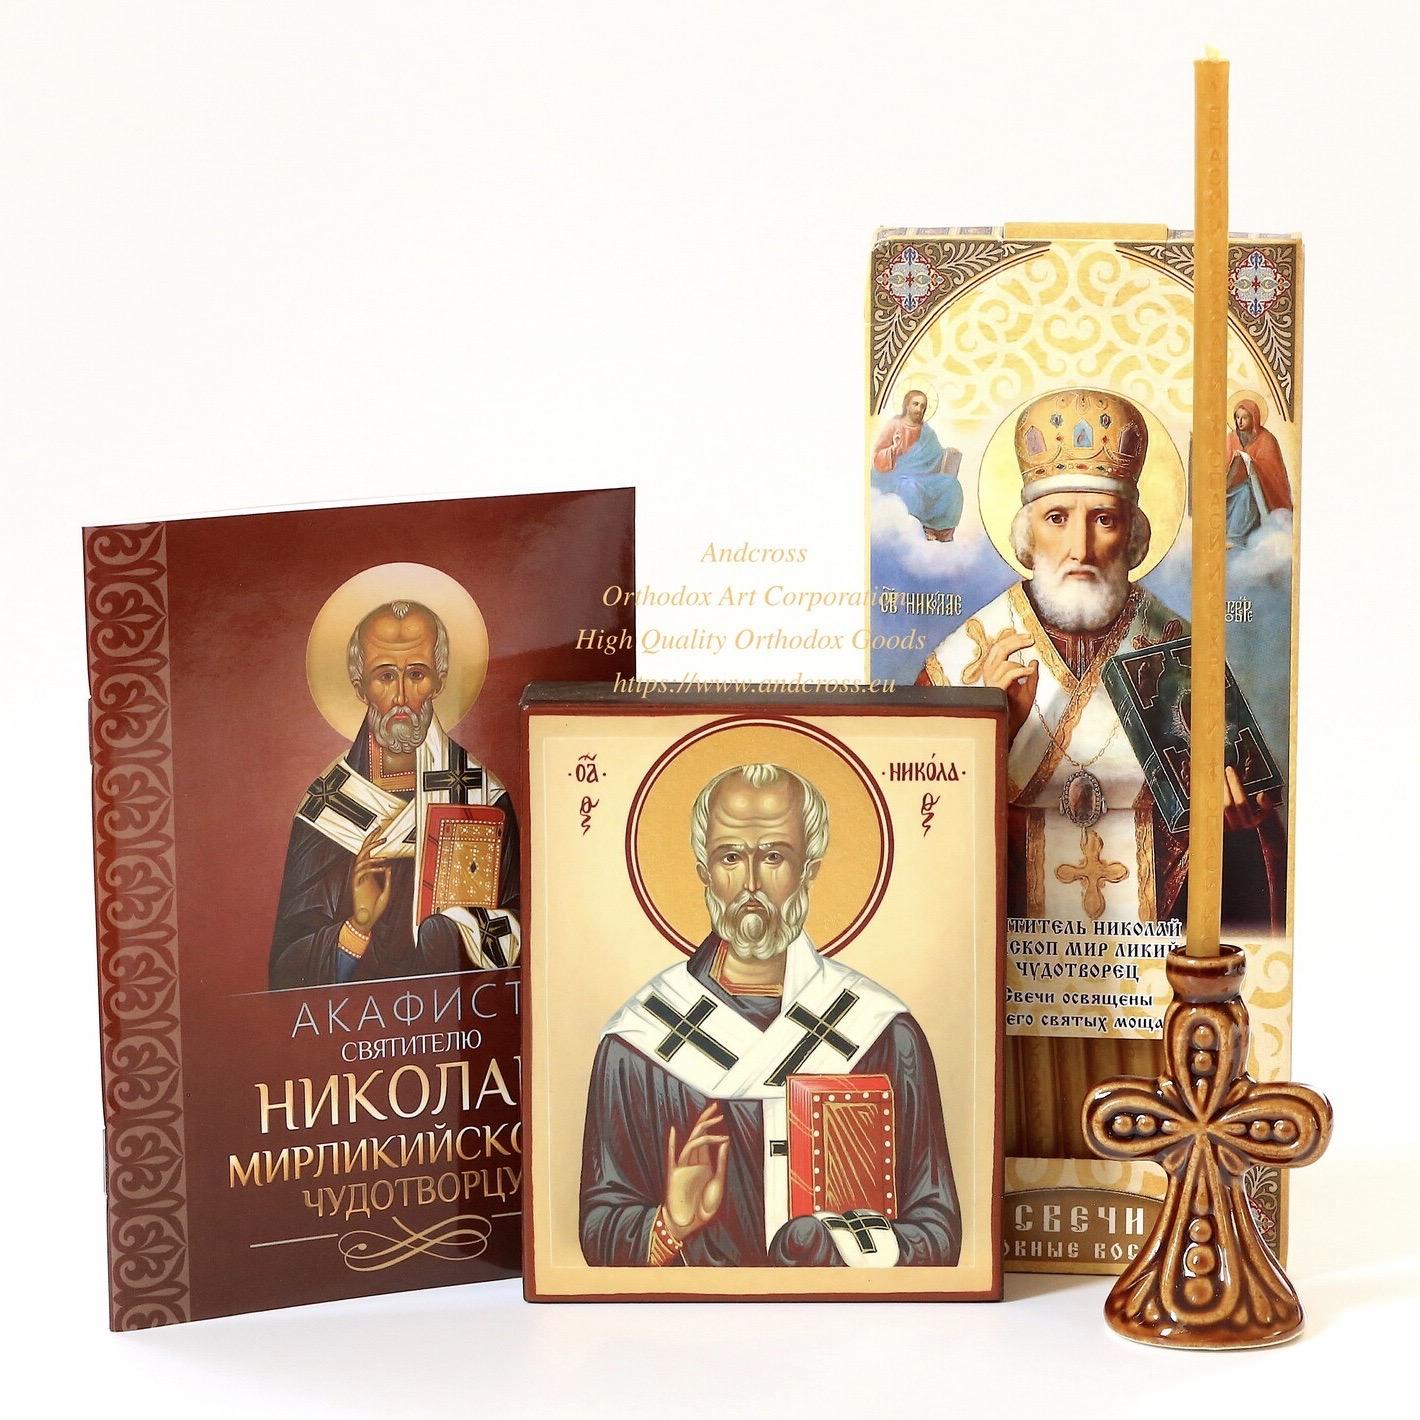 Orthodox Gift Set With The Icon Of St. Nicholas Wonderworker From Holy Dormition Pskovo-Petchersky Monastery. B476|Orthodox Gift Set With The Icon Of St. Nicholas Wonderworker From Holy Dormition Pskovo-Petchersky Monastery. B476